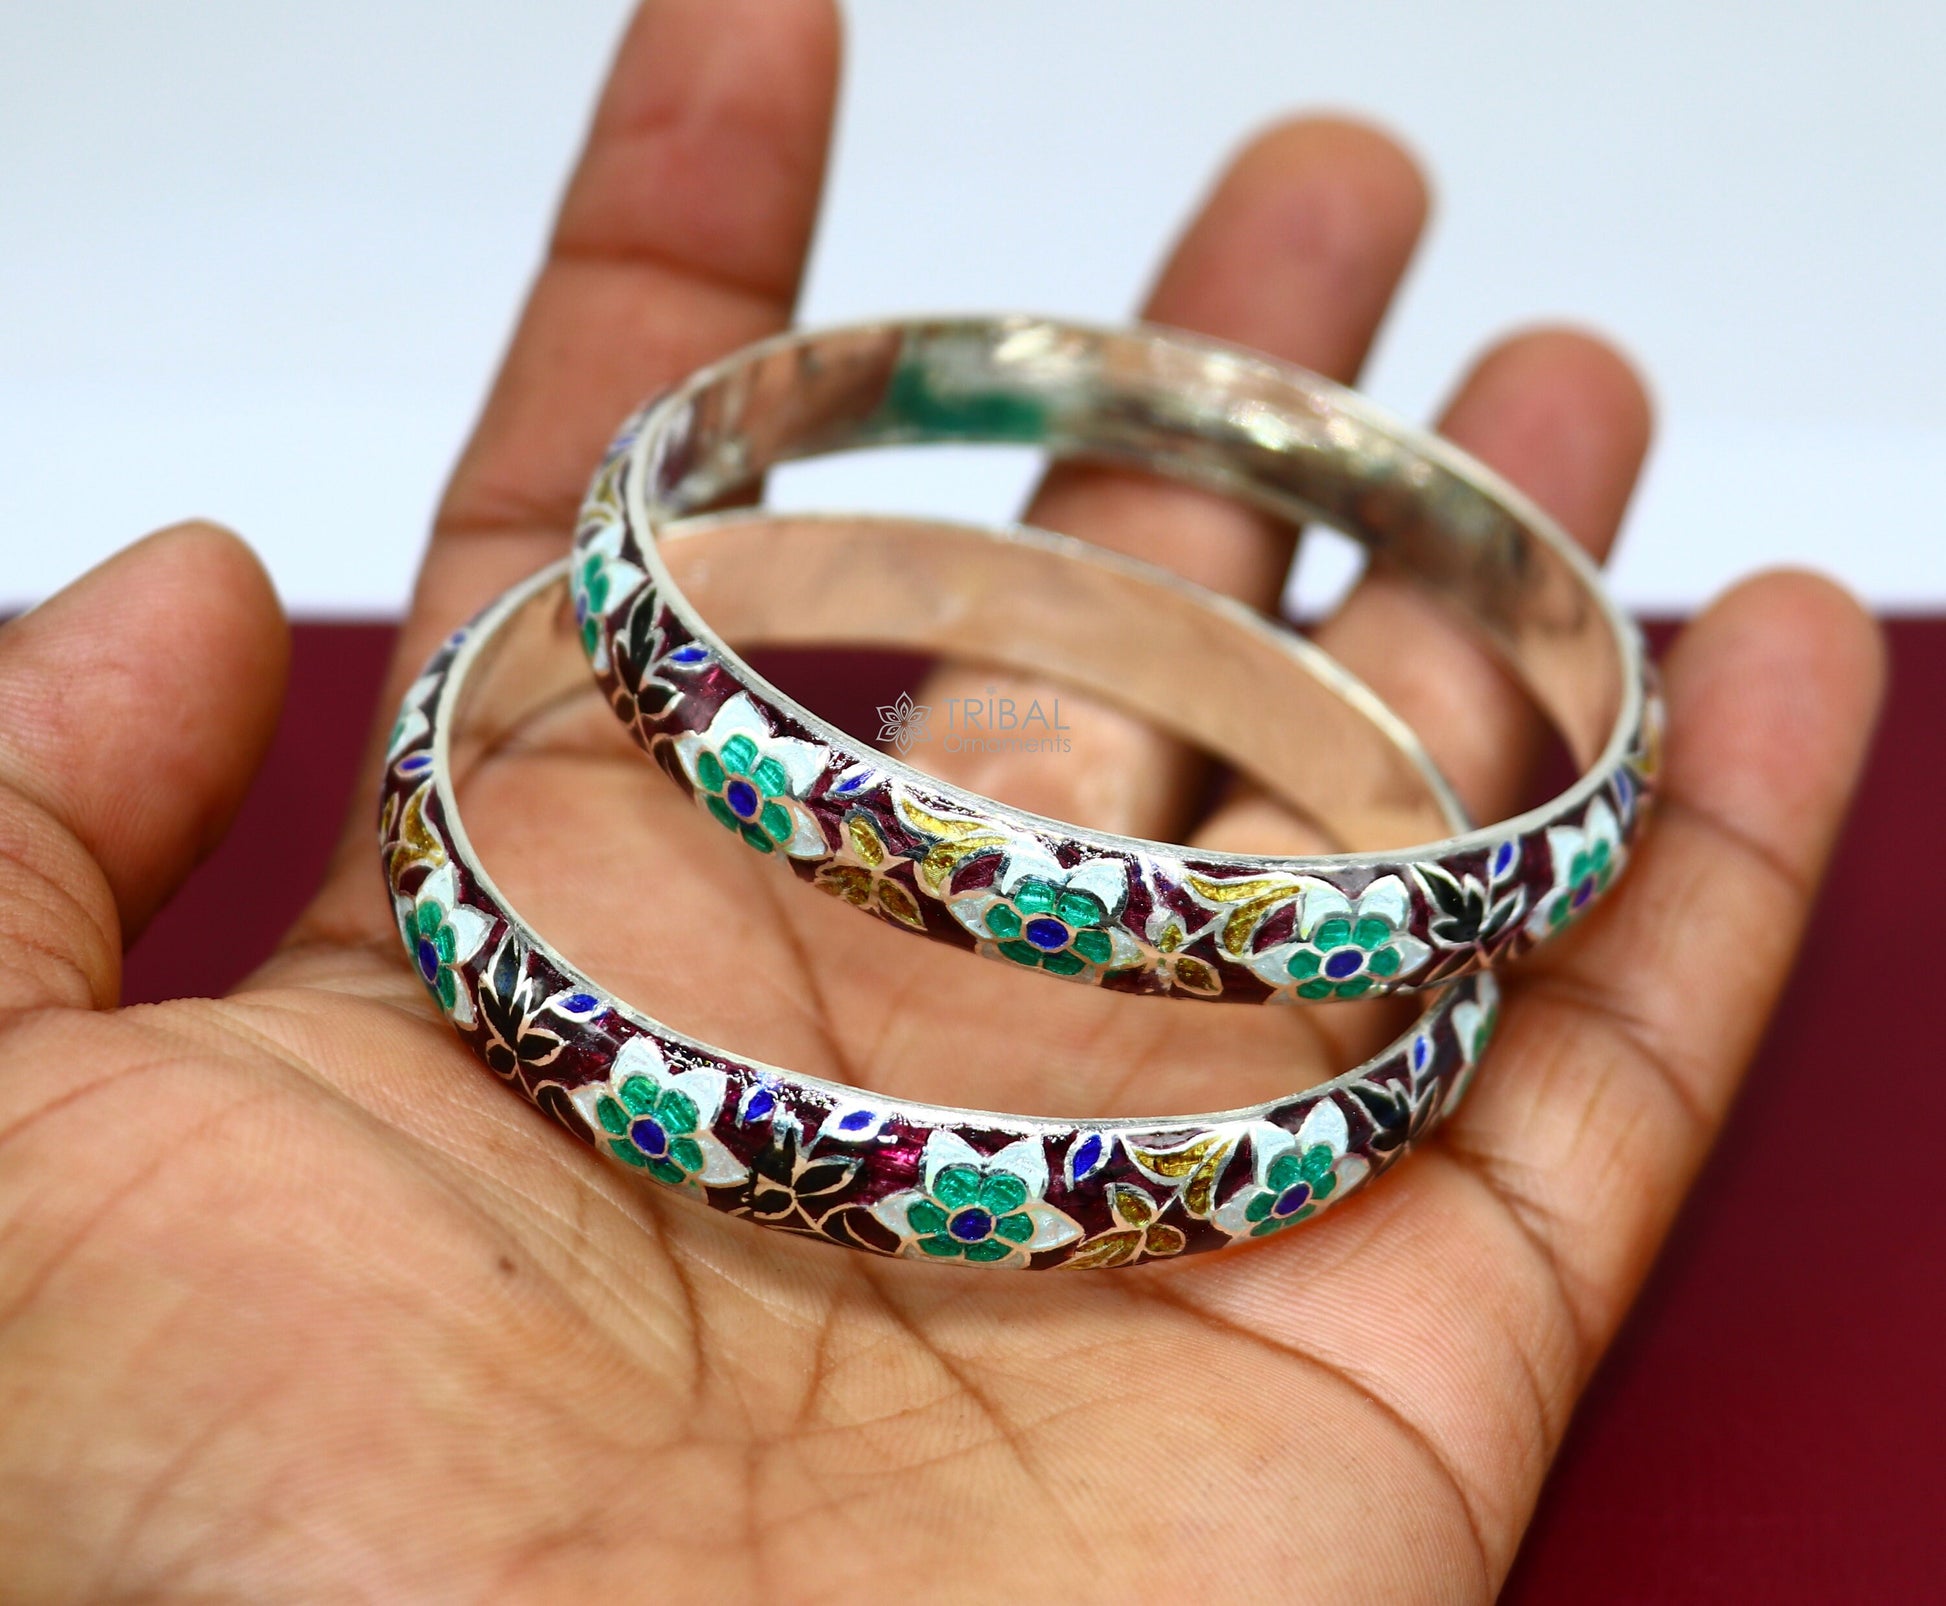 925 Sterling silver handmade amazing meenakari (color enamel )bangle bracelet vintage Cultral trendy style jewelry from india nba354 - TRIBAL ORNAMENTS